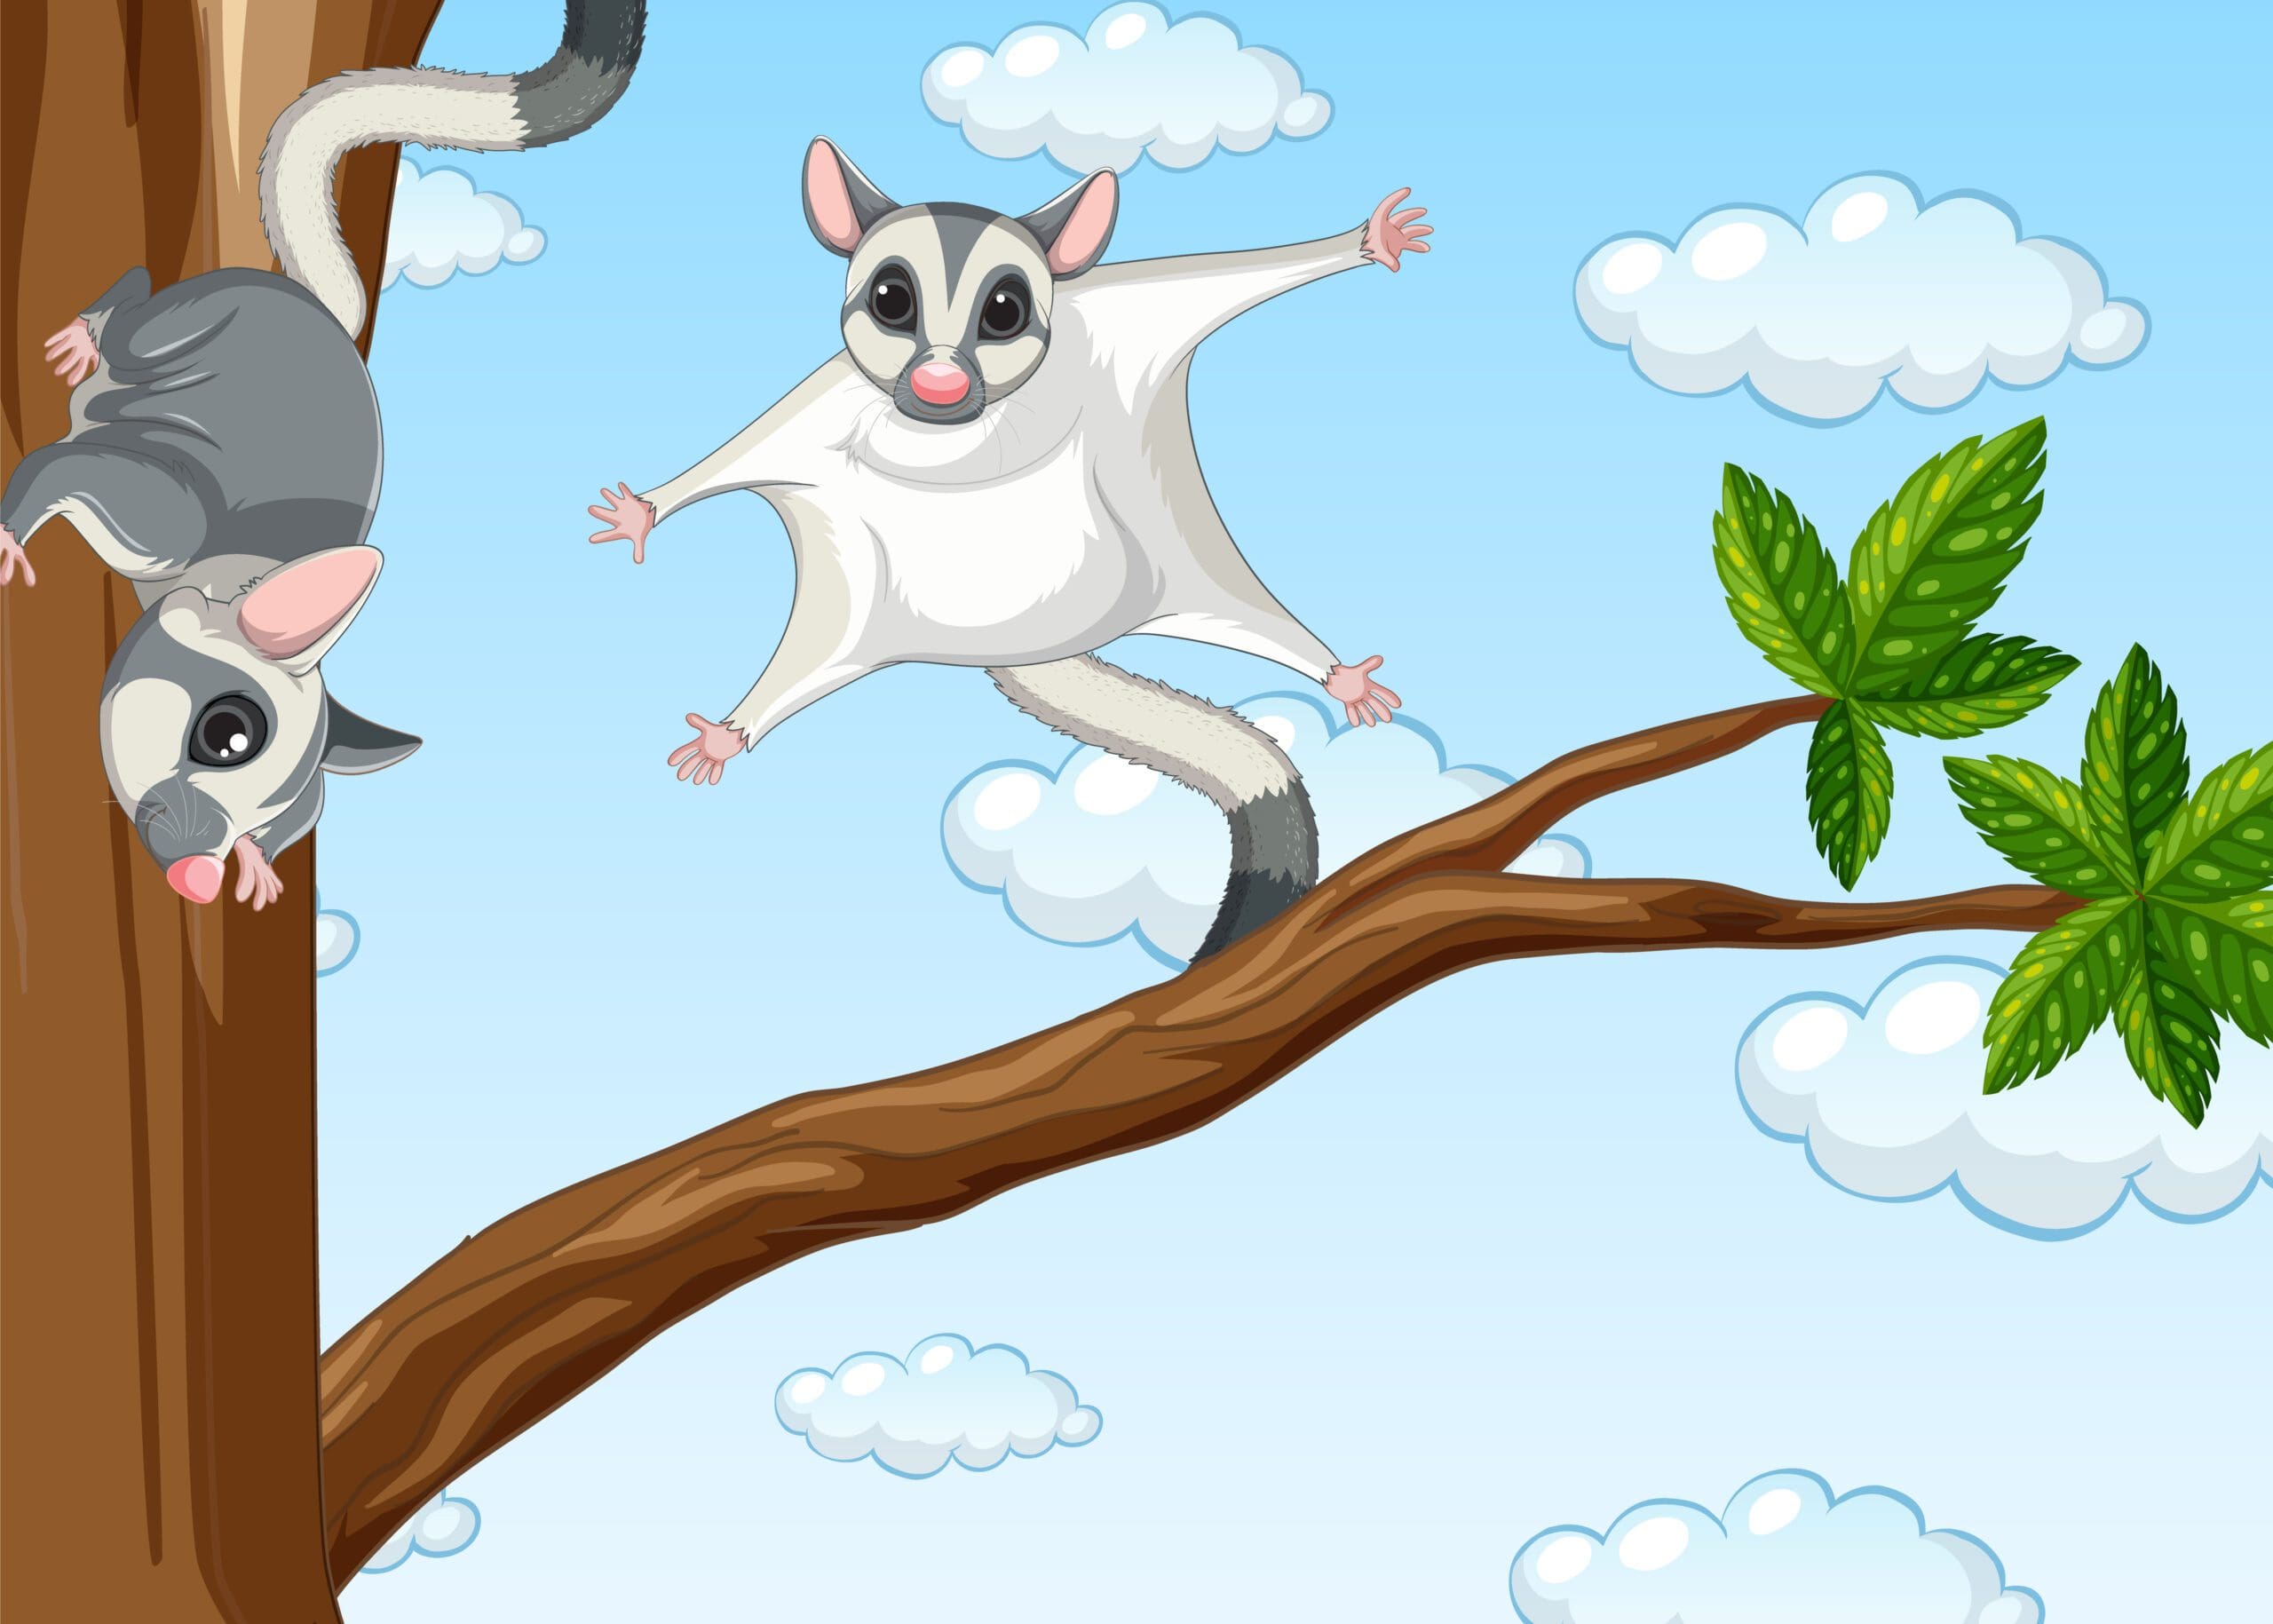 Cartoon graphic of two possums hanging from a tree branch.